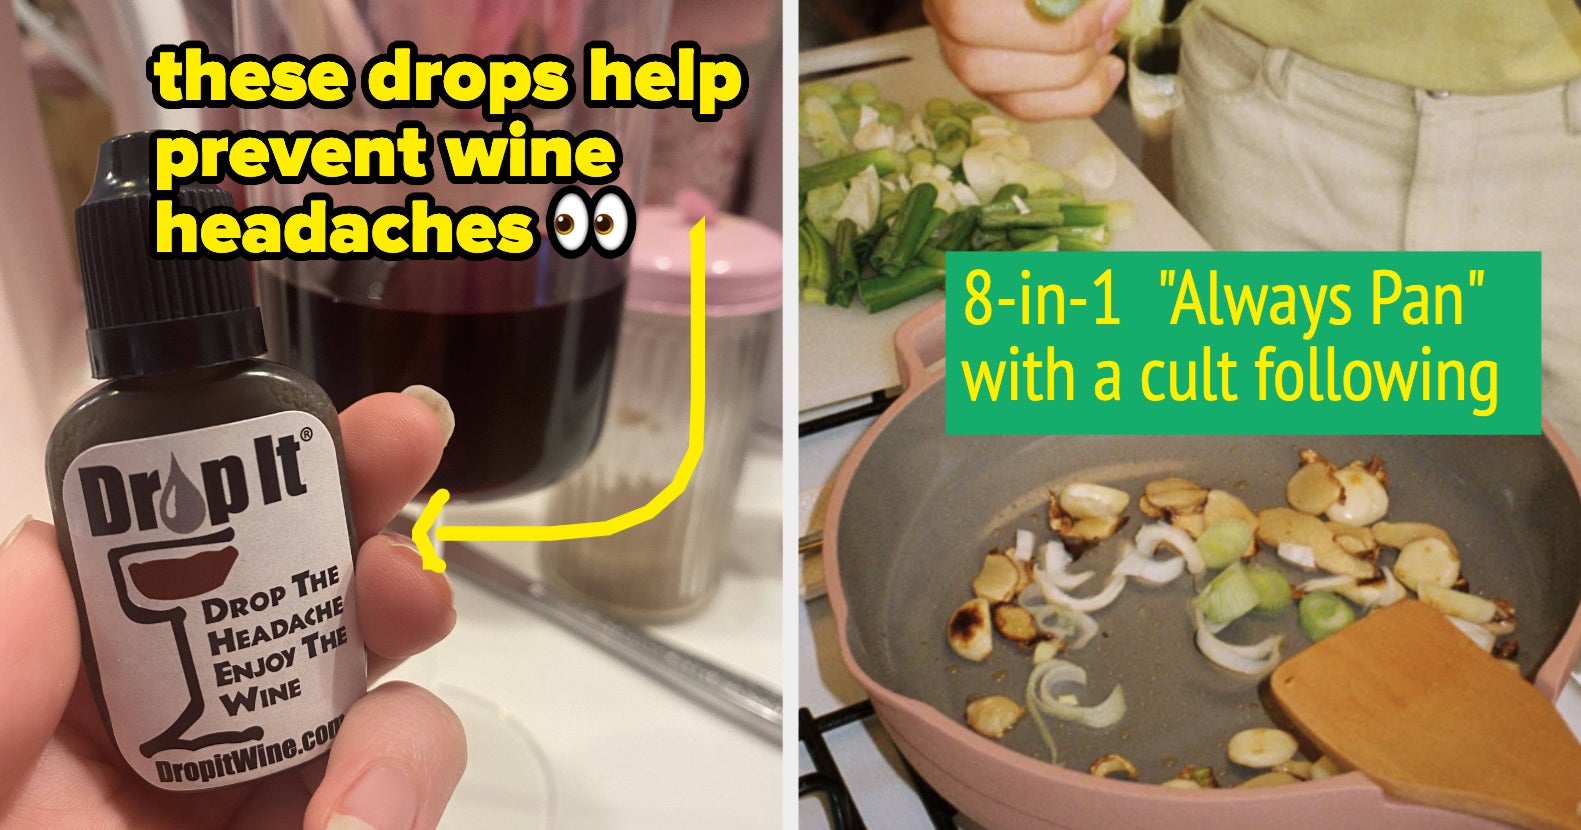 22 Brilliantly Simple Products That'll Make Your Life A Lot Easier